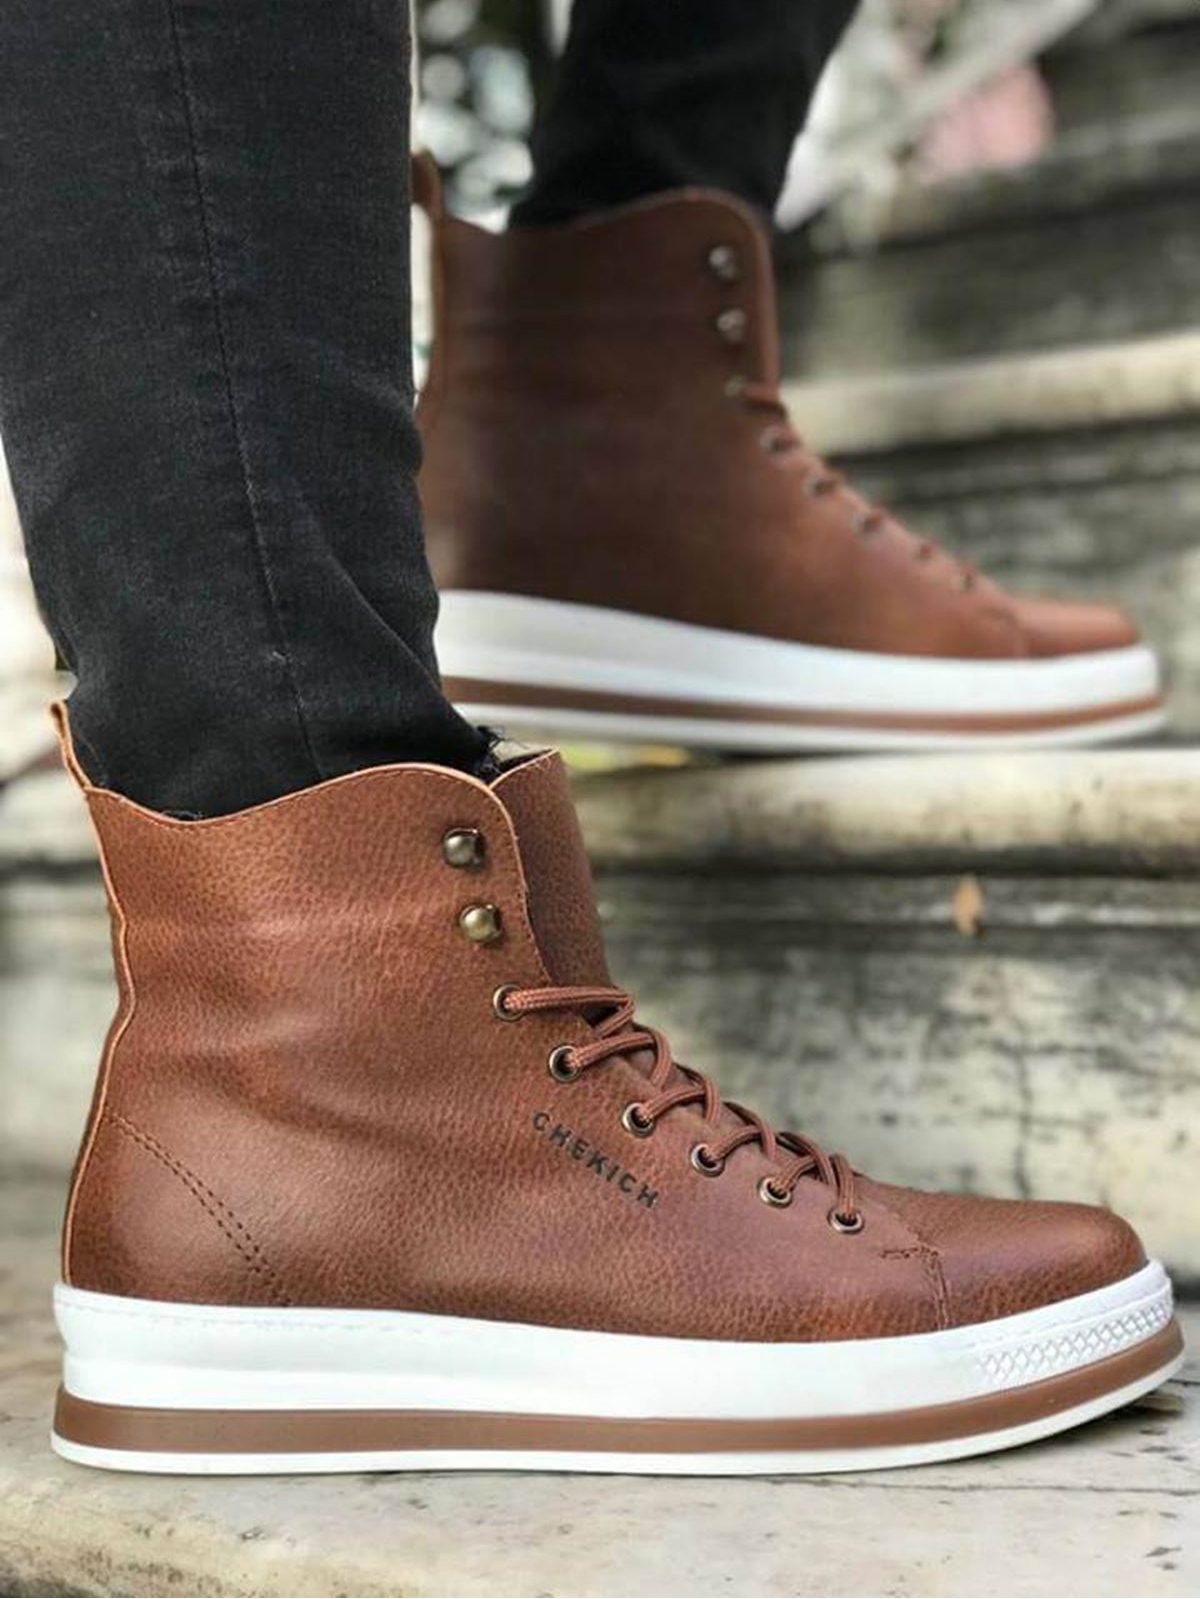 Chekich Brand Tan Color Artificial Leather Men Boots Winter Snow Lace Up Boots Leather Brown Sneakers Super Warm Outdoor Male Lightweight Breathable Odorless Short Safety Footwear Hiking Sport Comfortable Sewing CH055